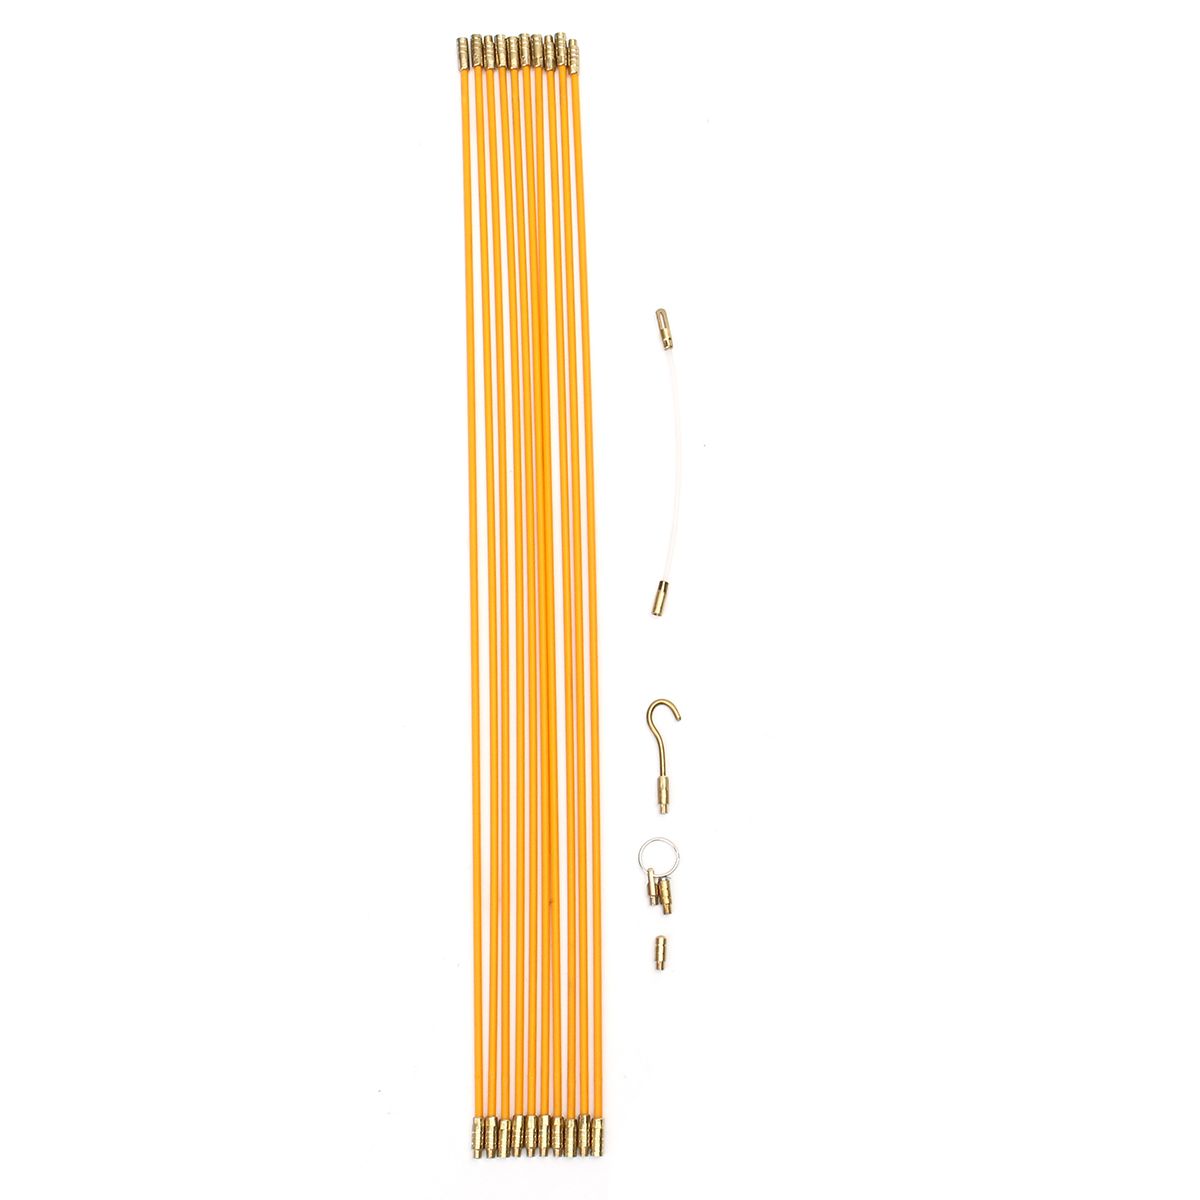 10Pcs-58cm-Fiberglass-Running-Installation-Electrical-Pull-Rods-Wire-Fish-Tape-Cable-Access-Kit-1375684